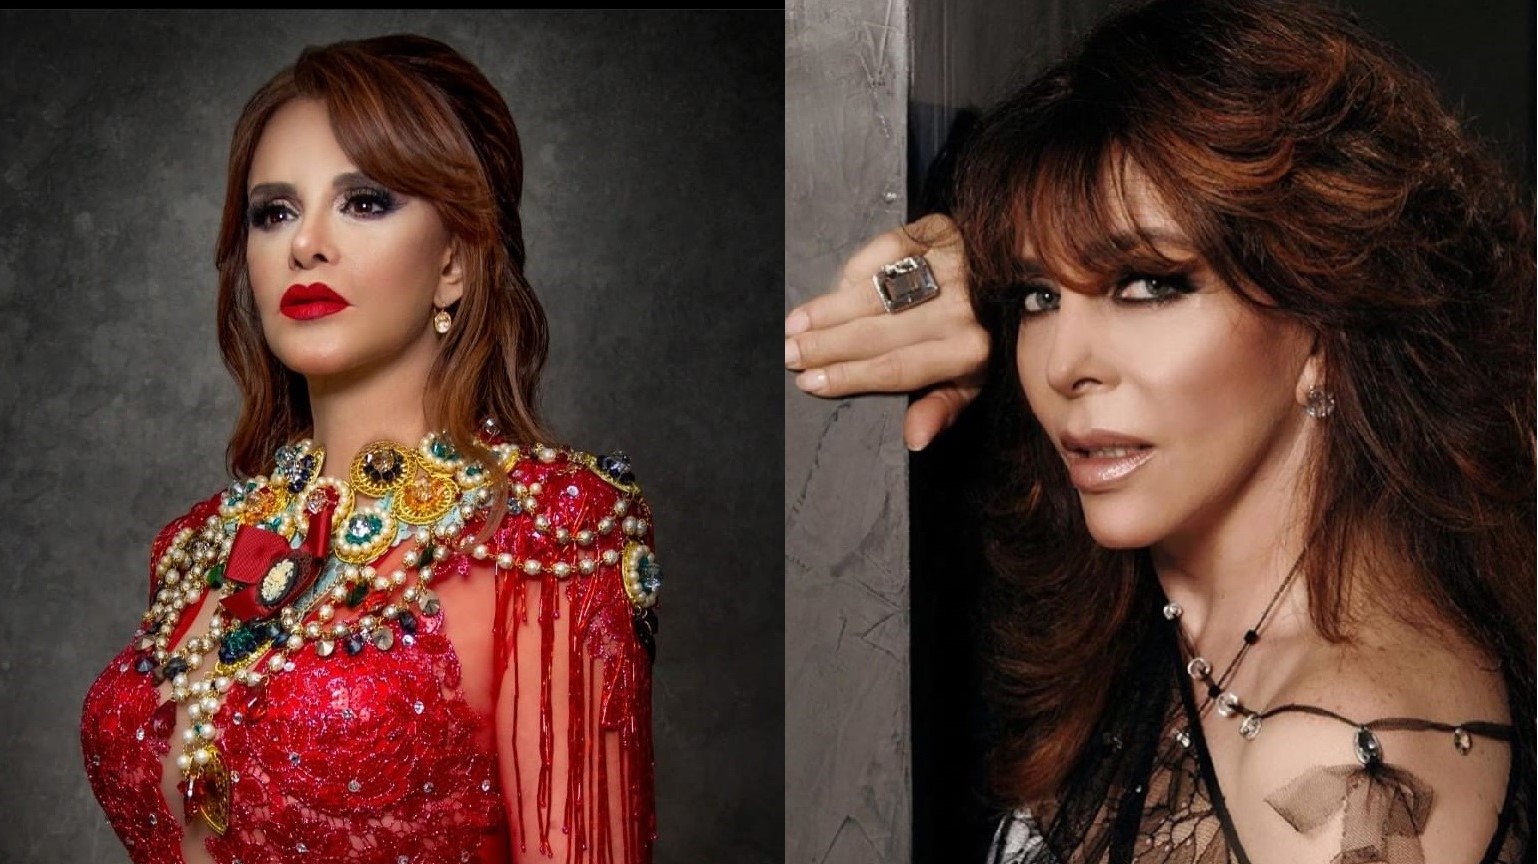 Lucia declined to comment on the controversy surrounding Castro (Photo: Instagram / @luciamendezof @vrocastroficial)